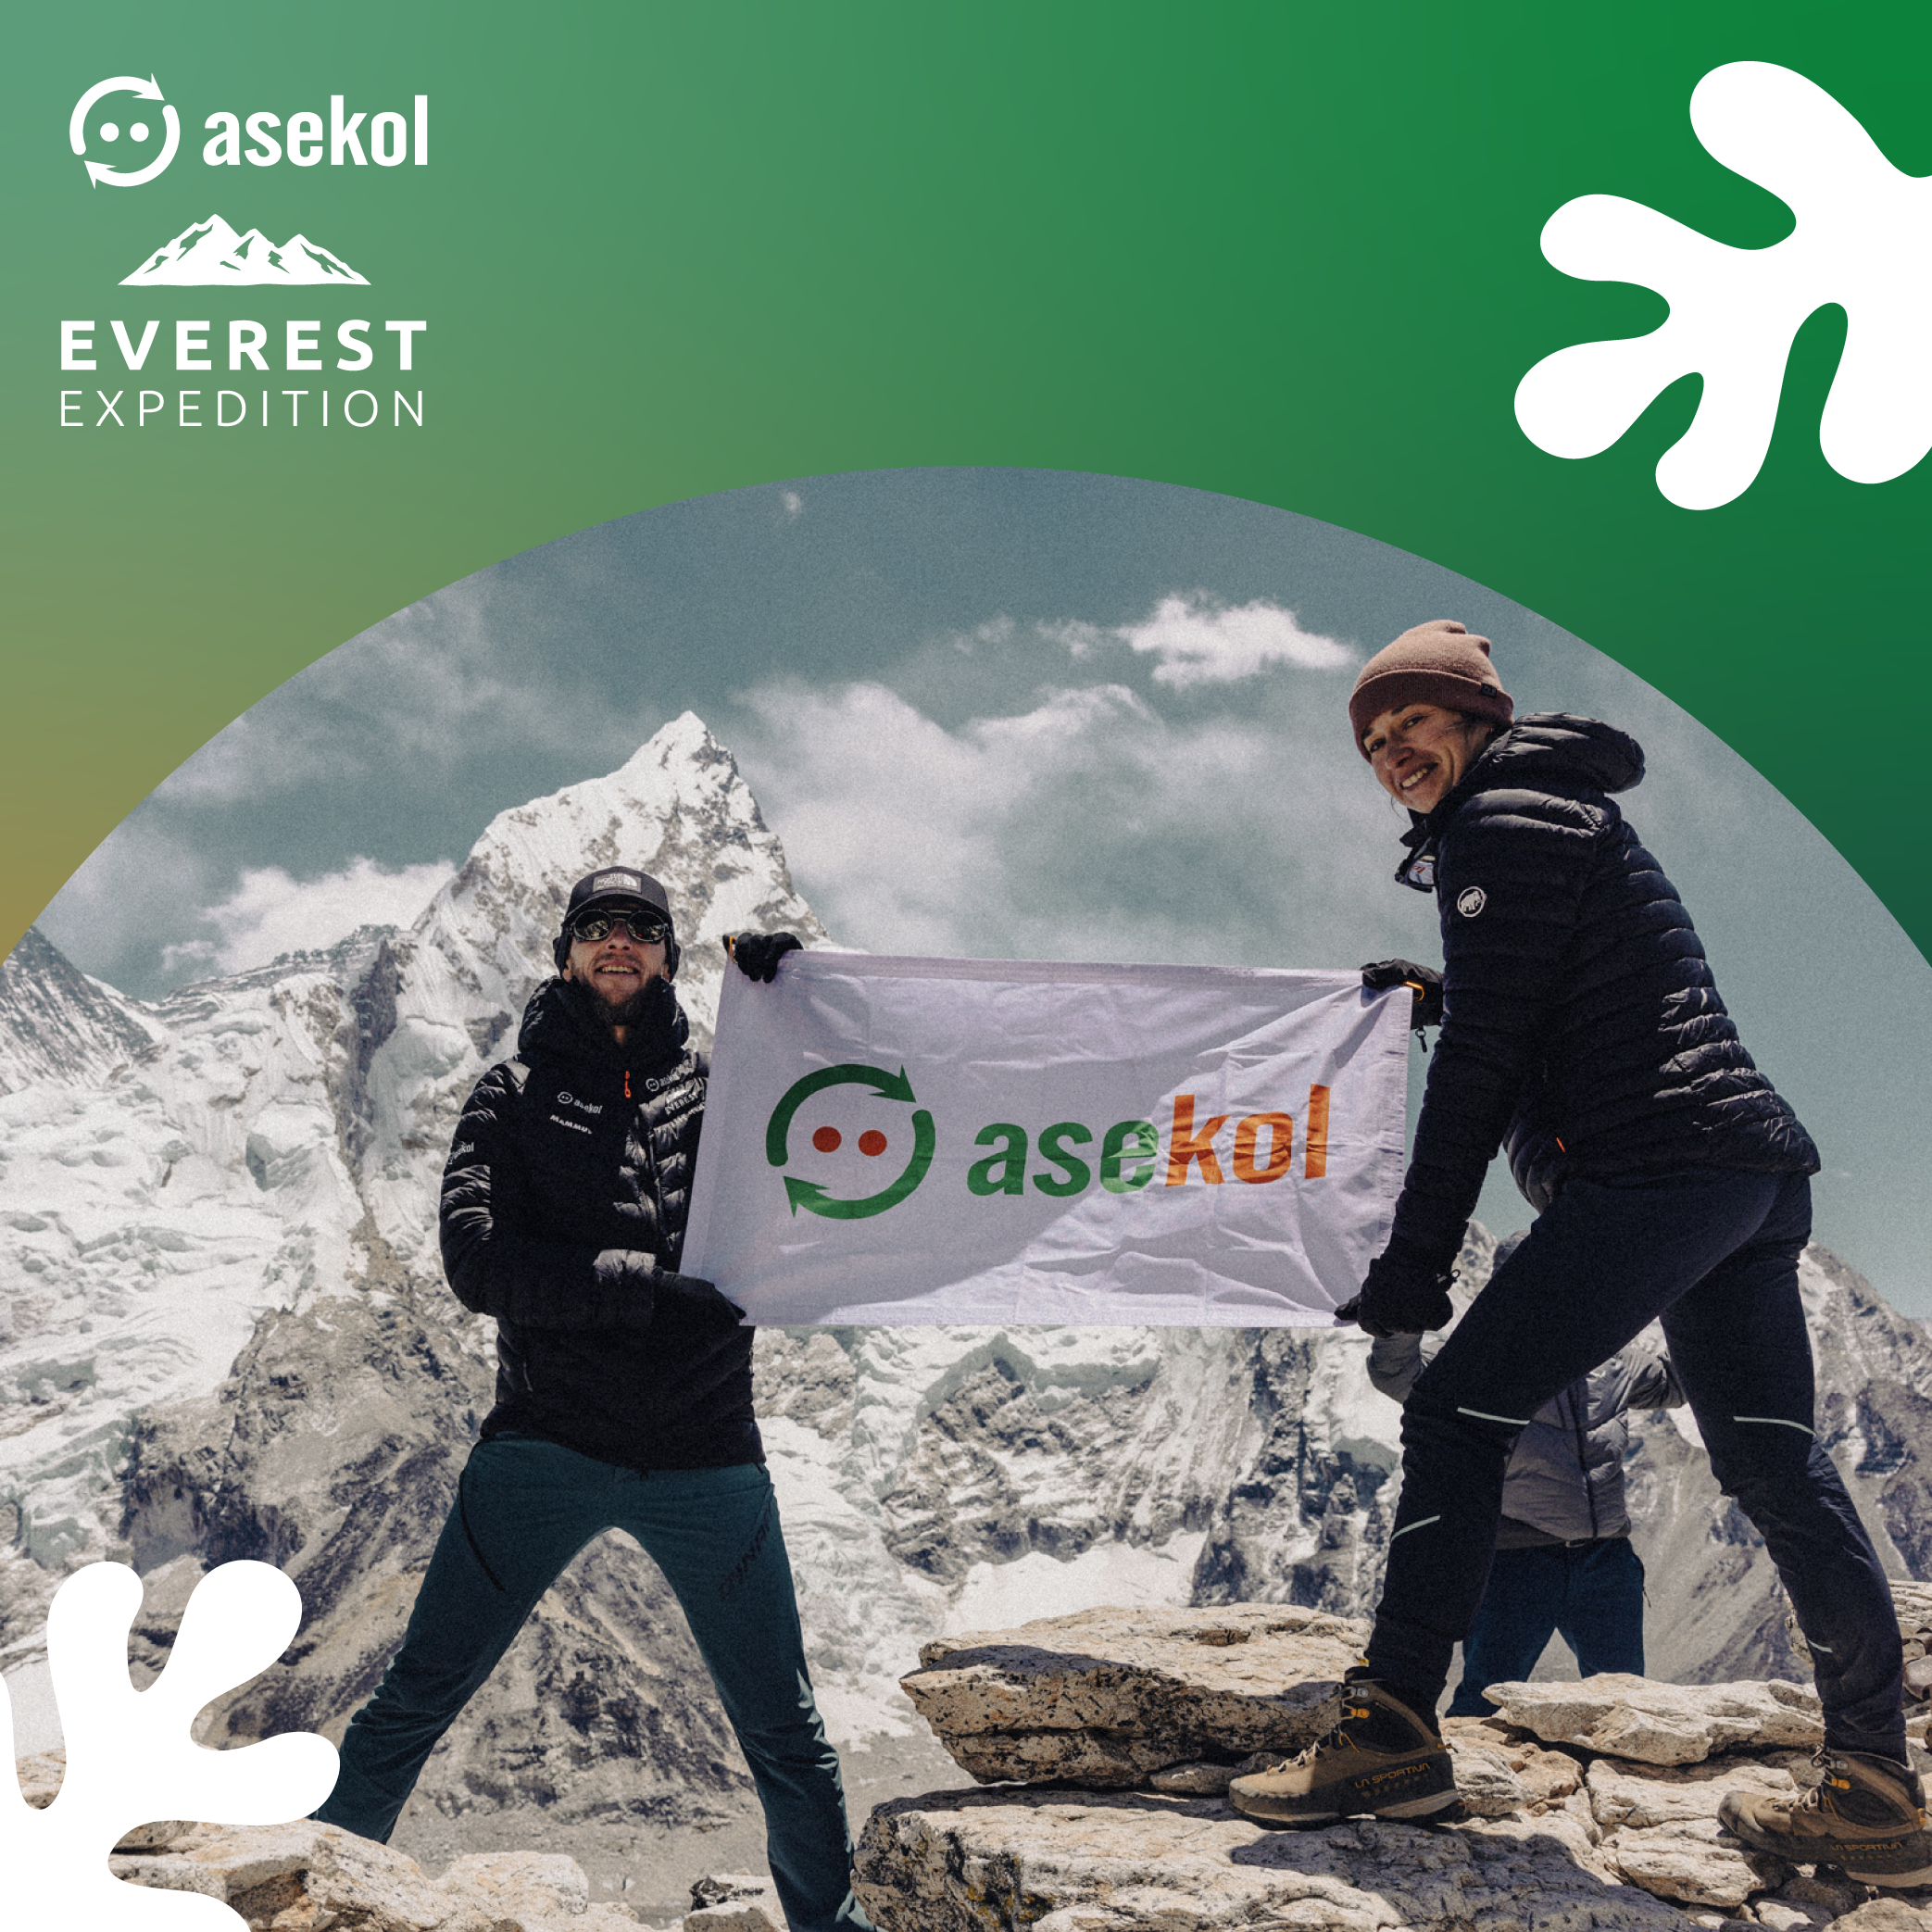 Asekol Everest Expedition